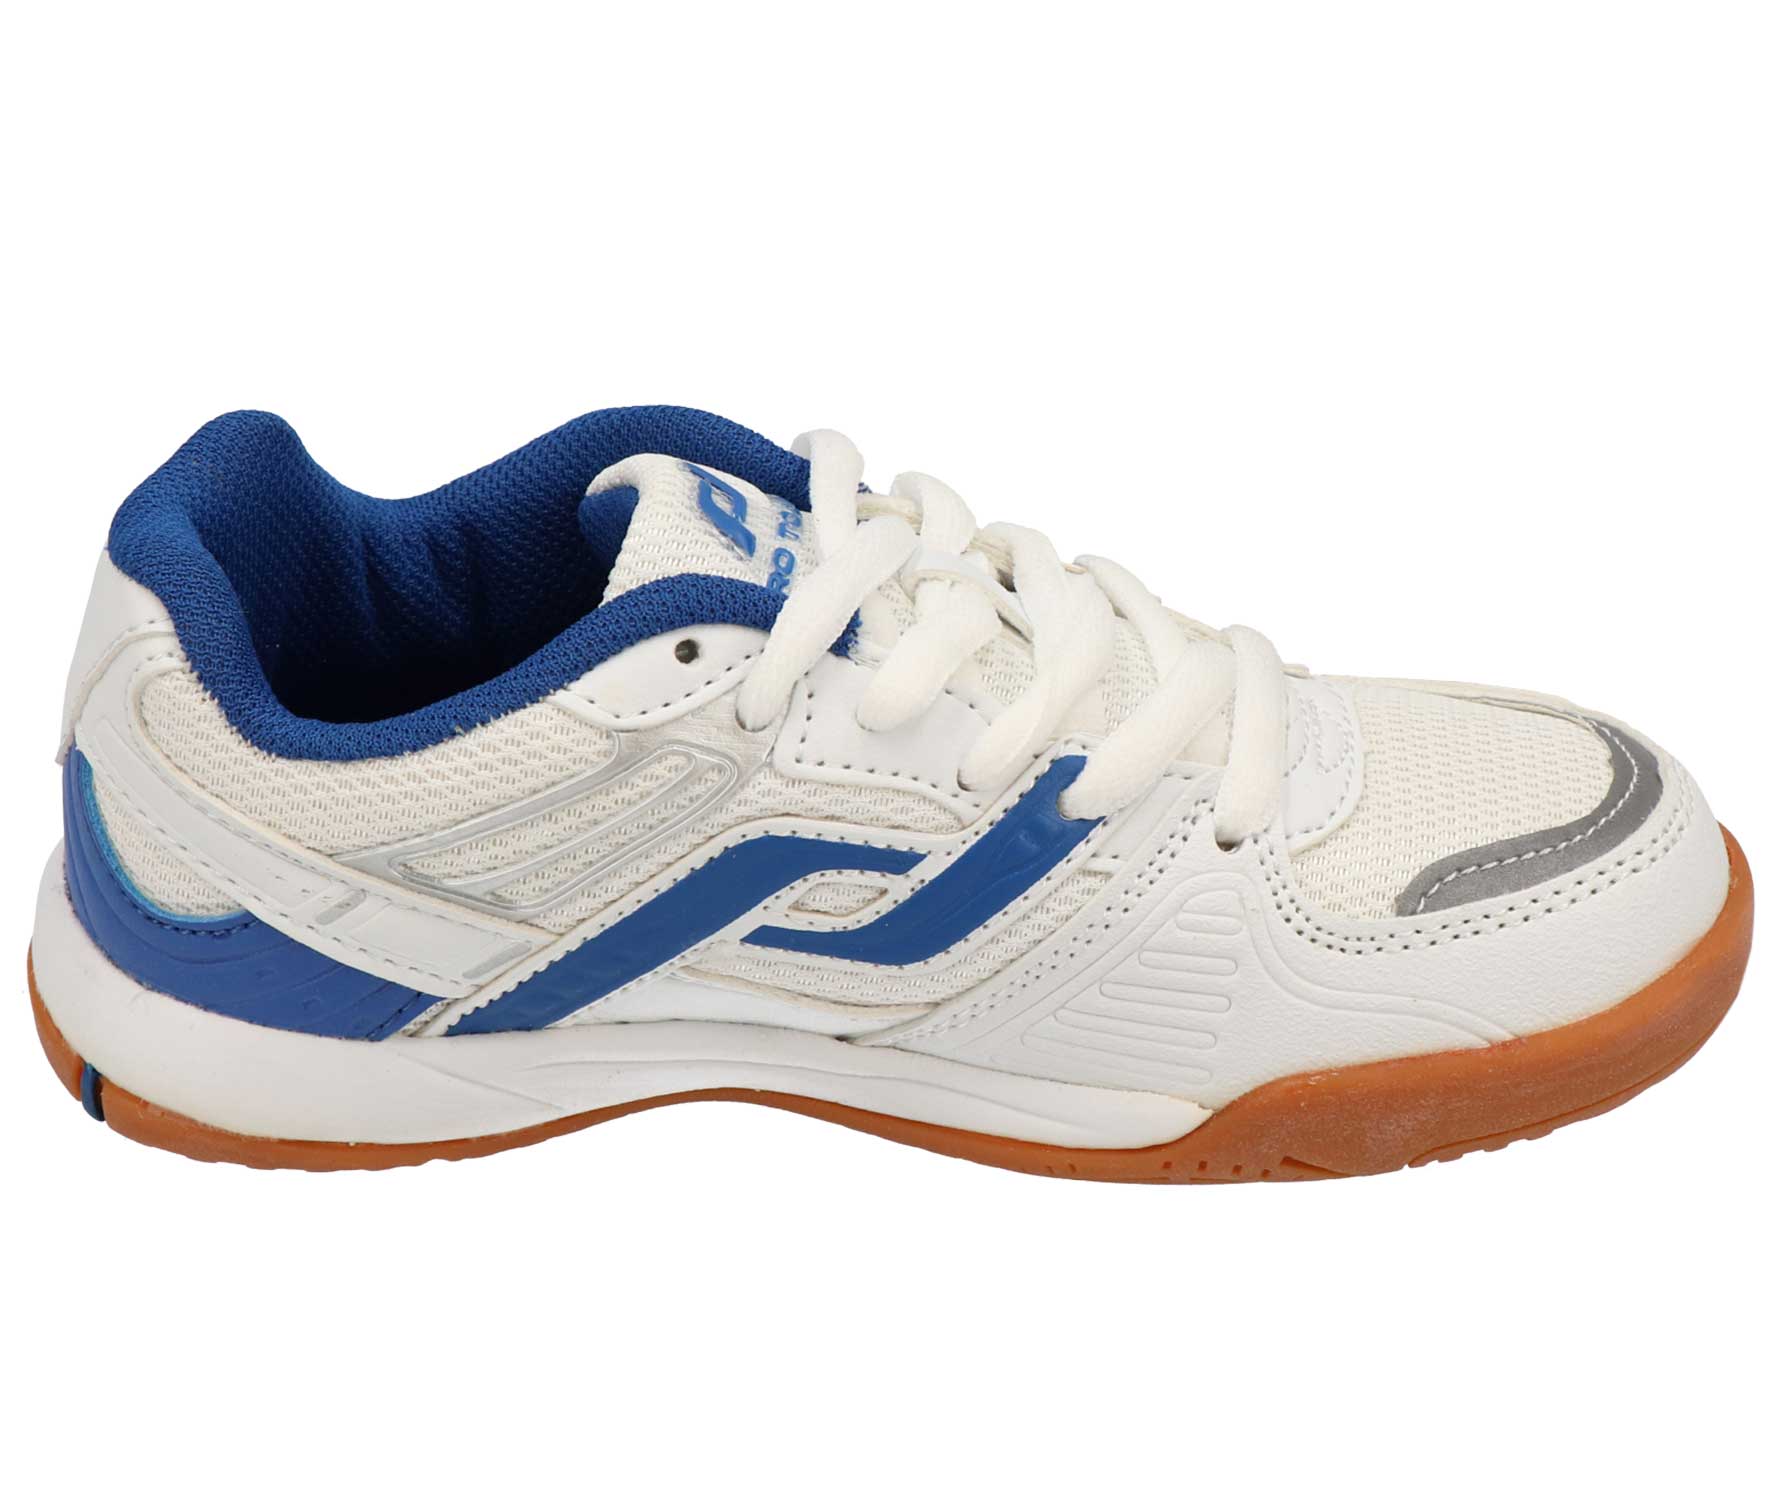 Pro Touch Unisex Kinder Rebel 3 Volleyball-Schuh